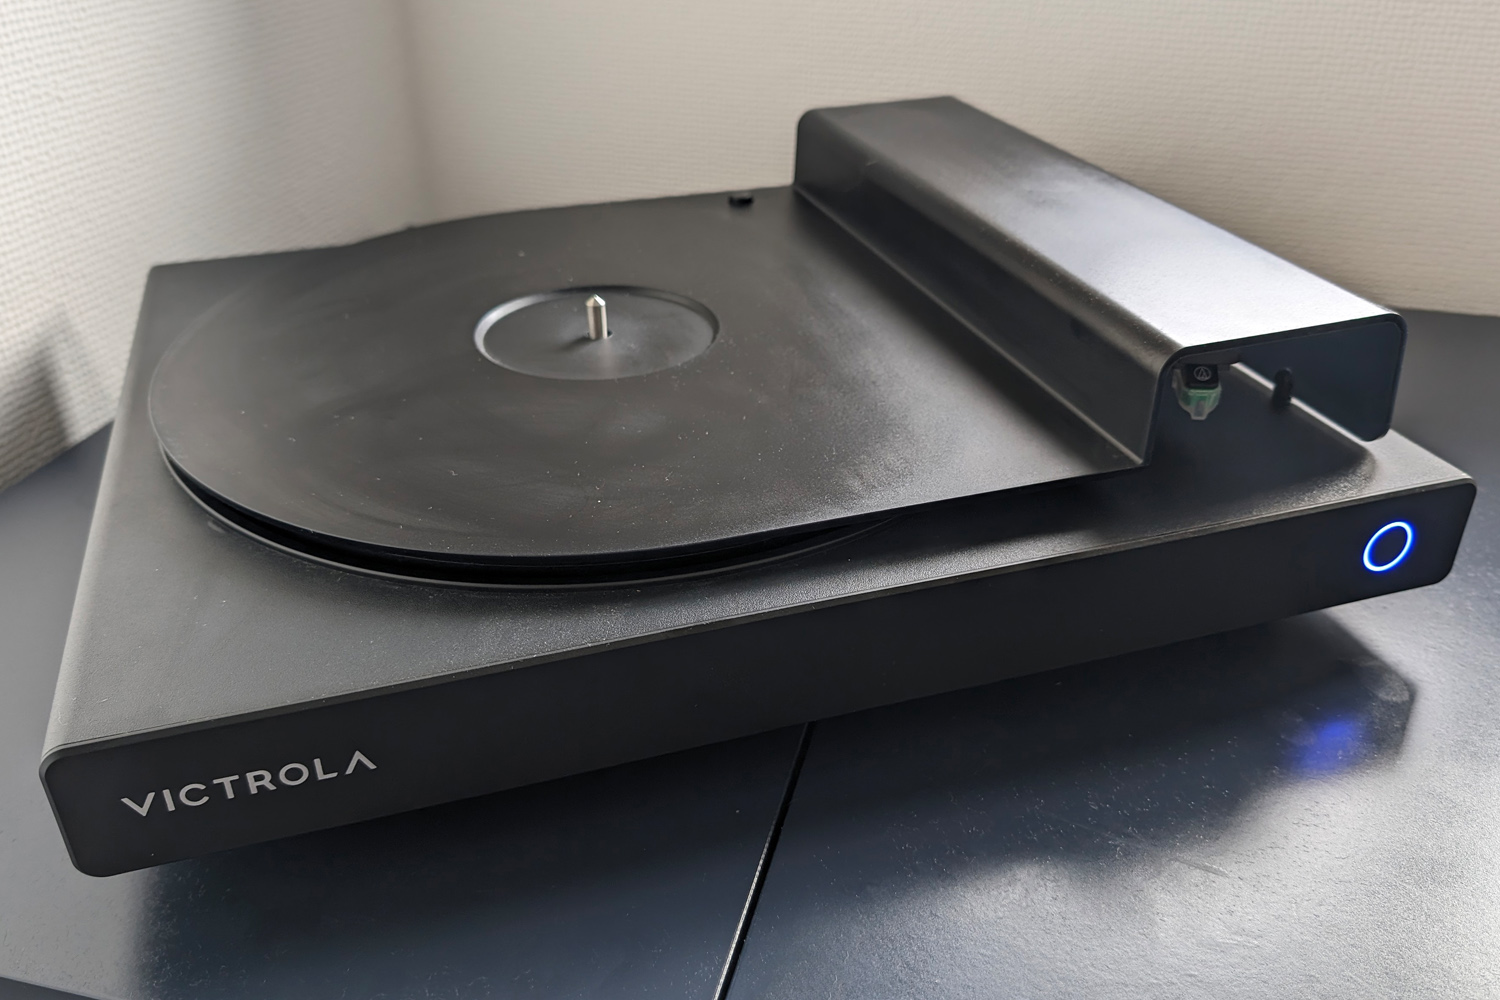 Victrola Hi-Res Onyx review dust cover